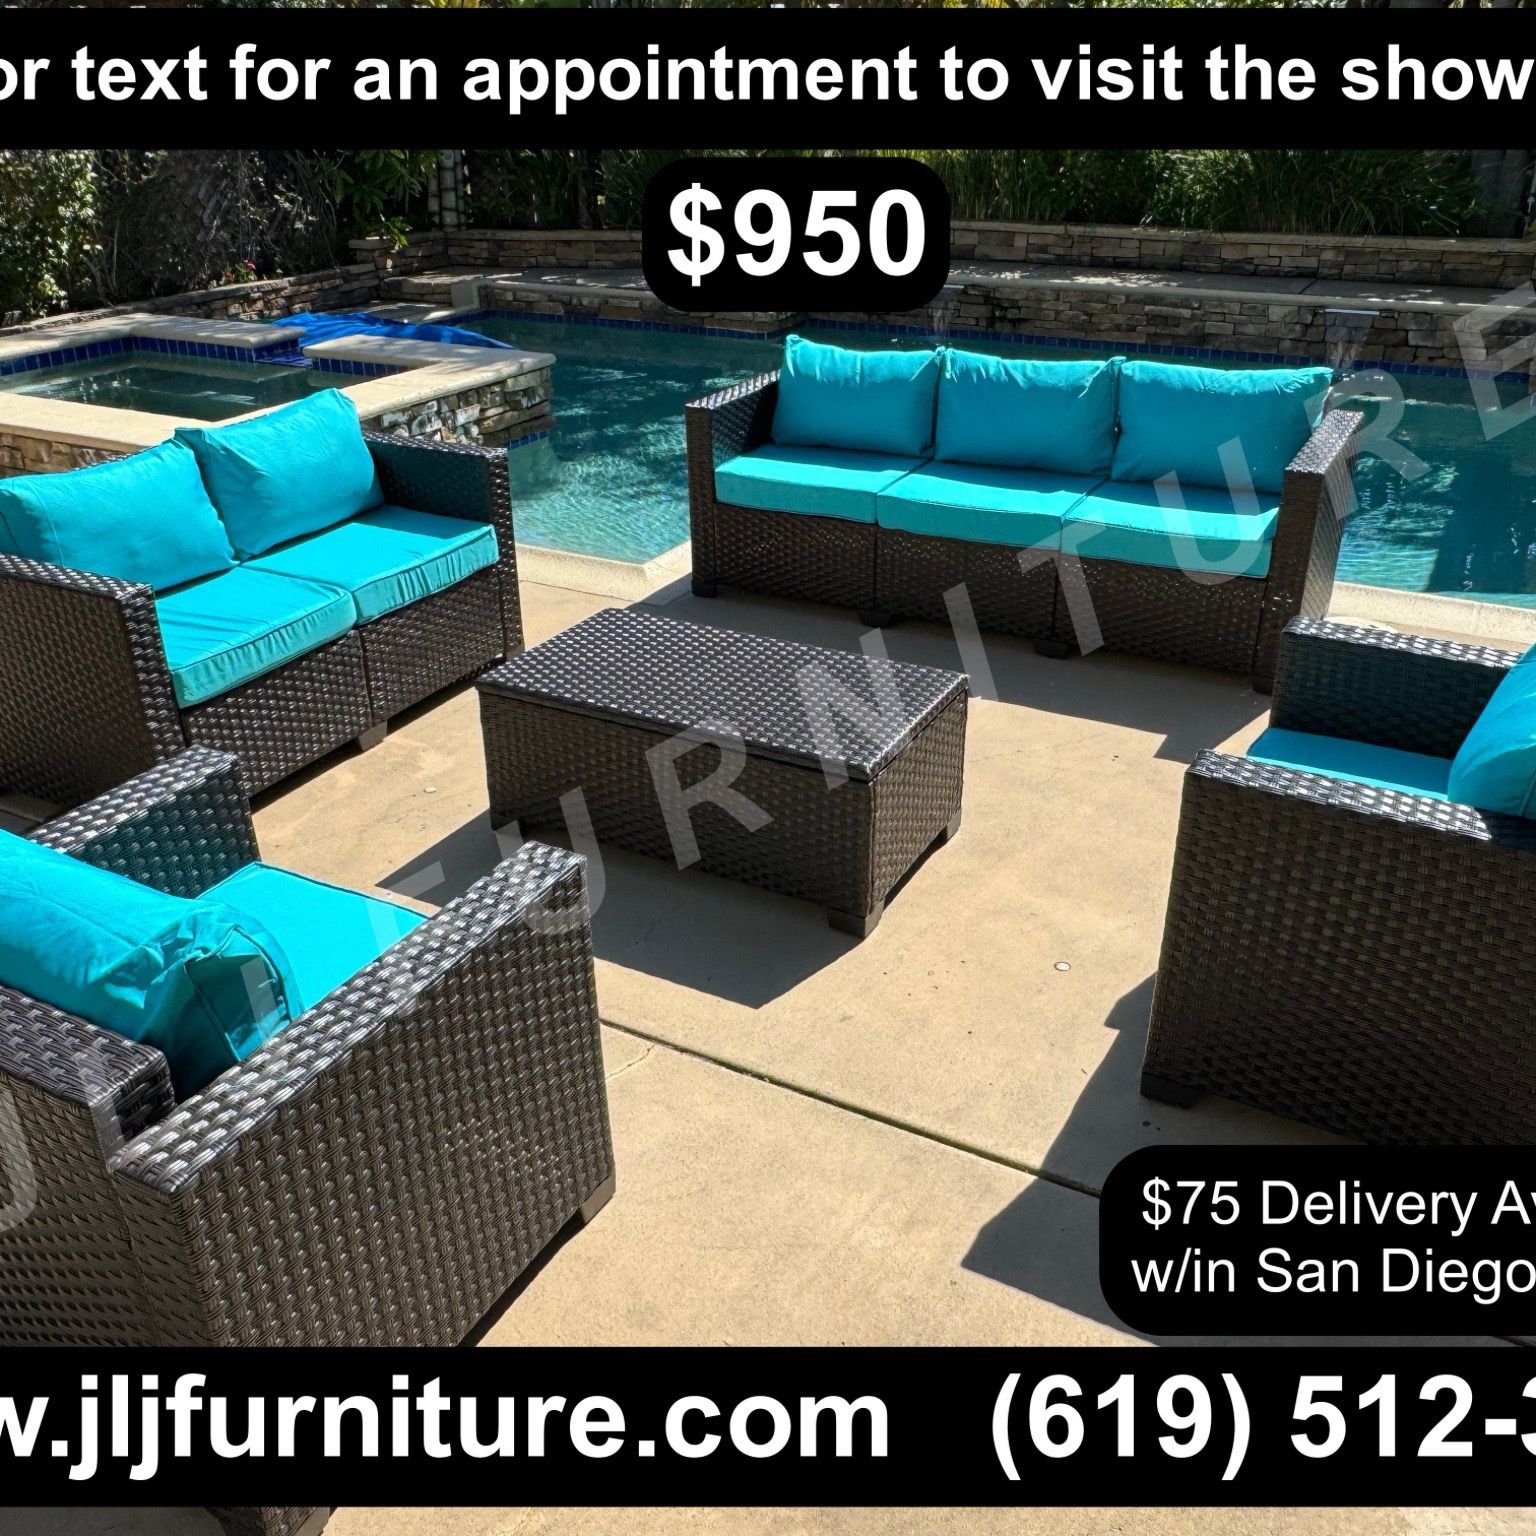 NEW🔥 Outdoor Patio Furniture Set Black Wicker 5 Pc Turquoise 4" Non Slip Cushions ASSEMBLED